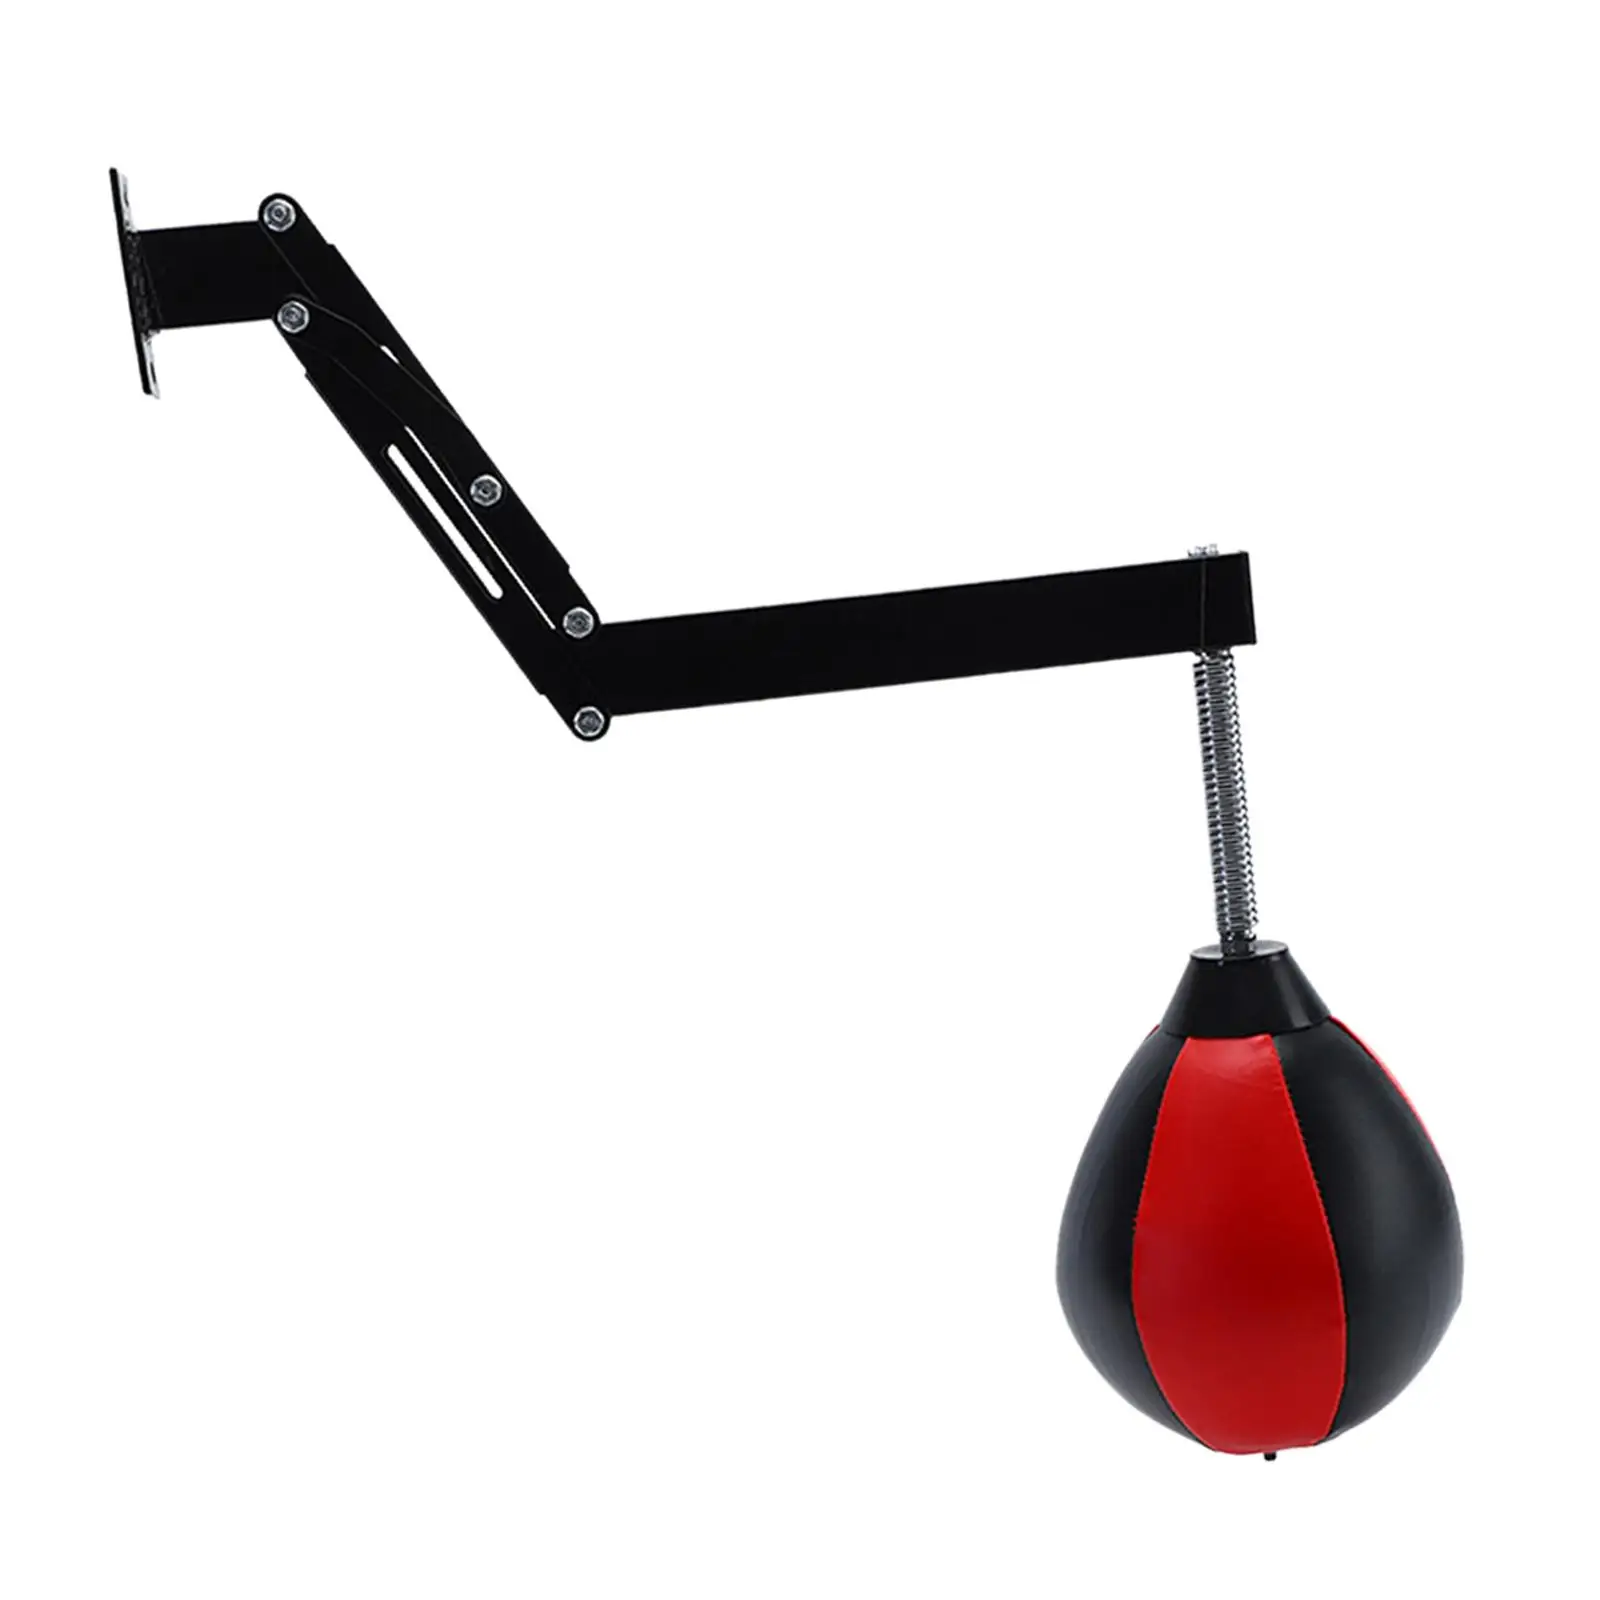 Speed Bag Inflatable Adjustable Wall Mount Heavy Duty PU Leather Boxing Punching Bag for Exercise Fitness Workout Kids Adult